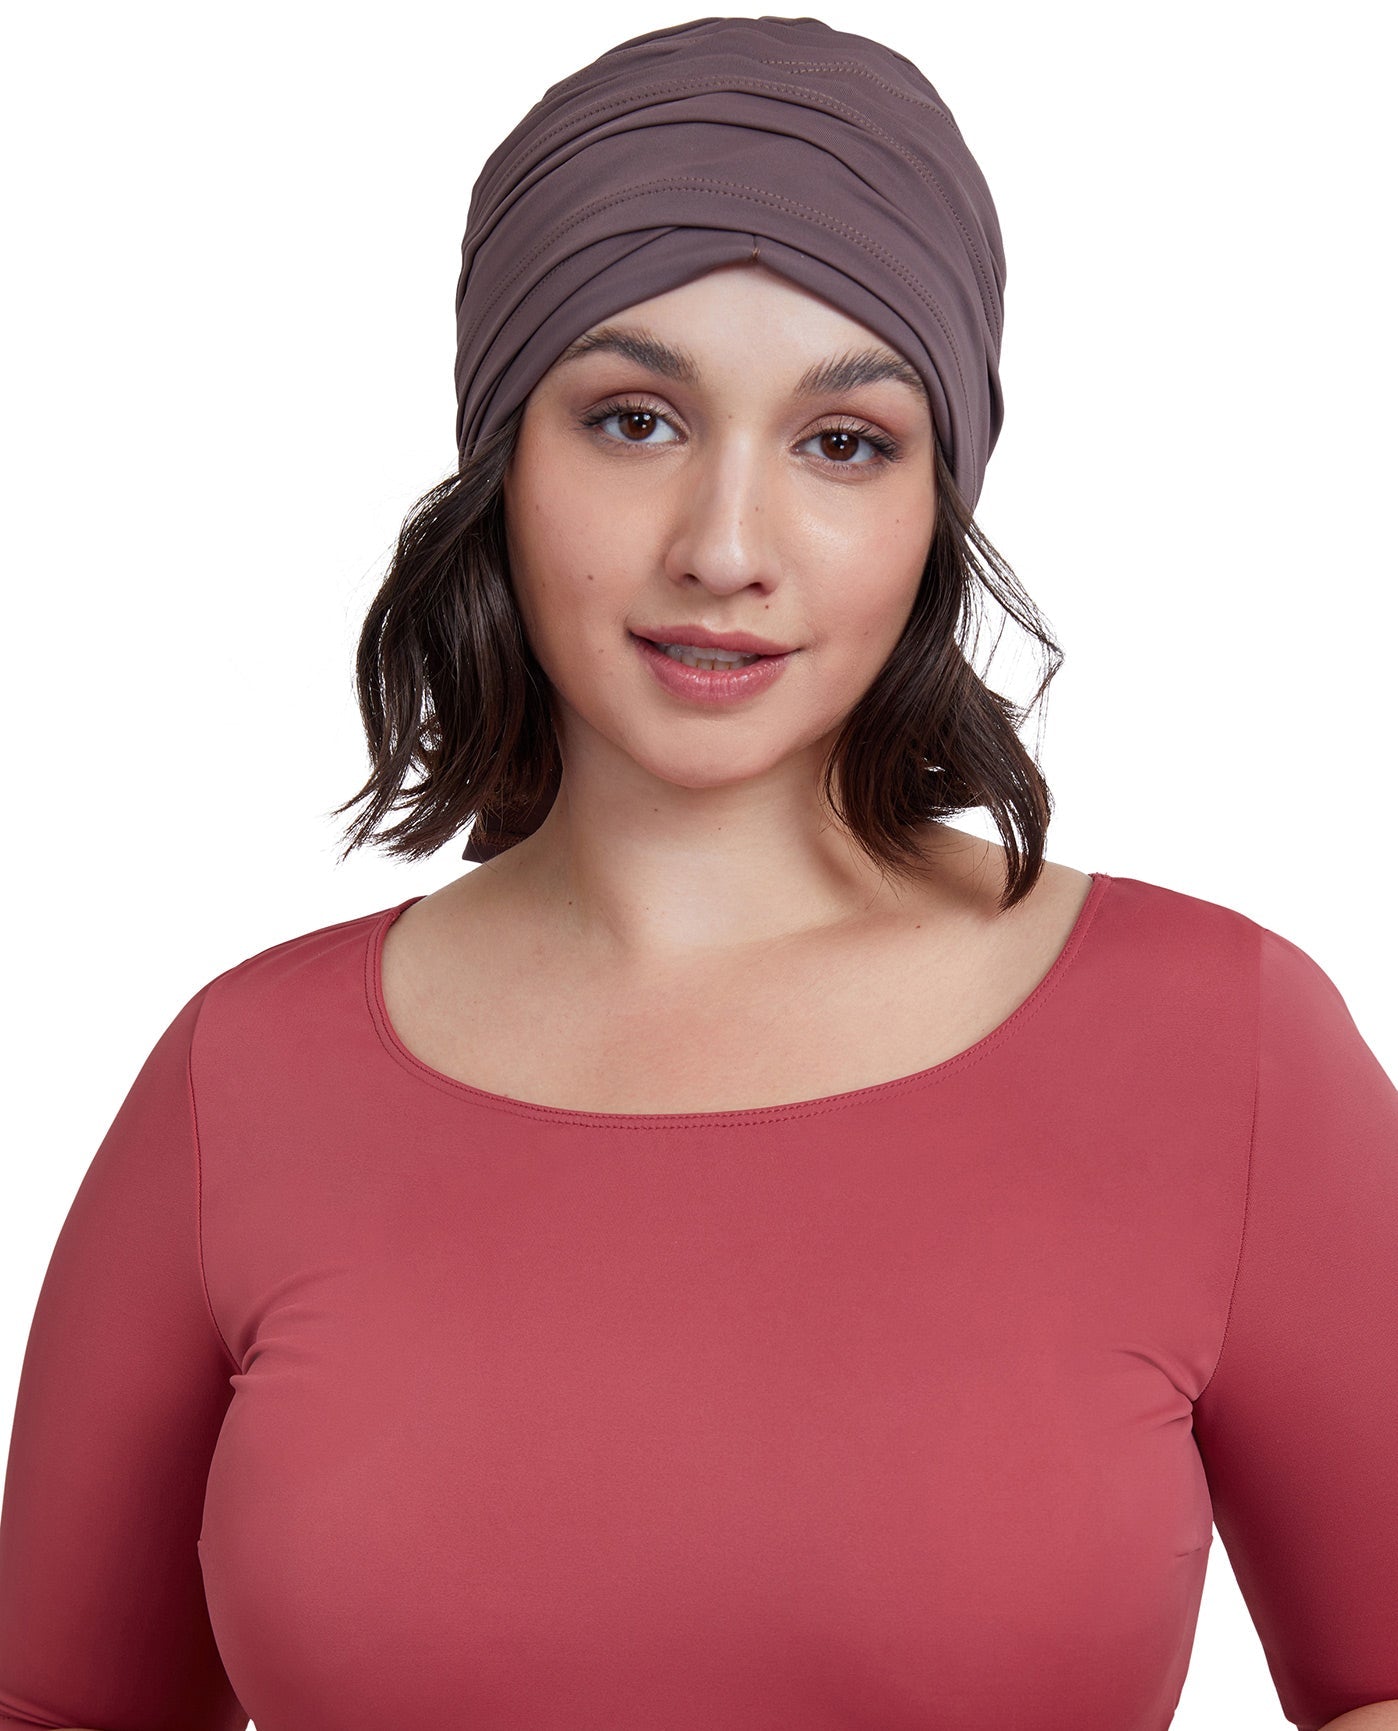 Front View Of Gottex Modest Hair Covering With Tie | GOTTEX MODEST CEDAR